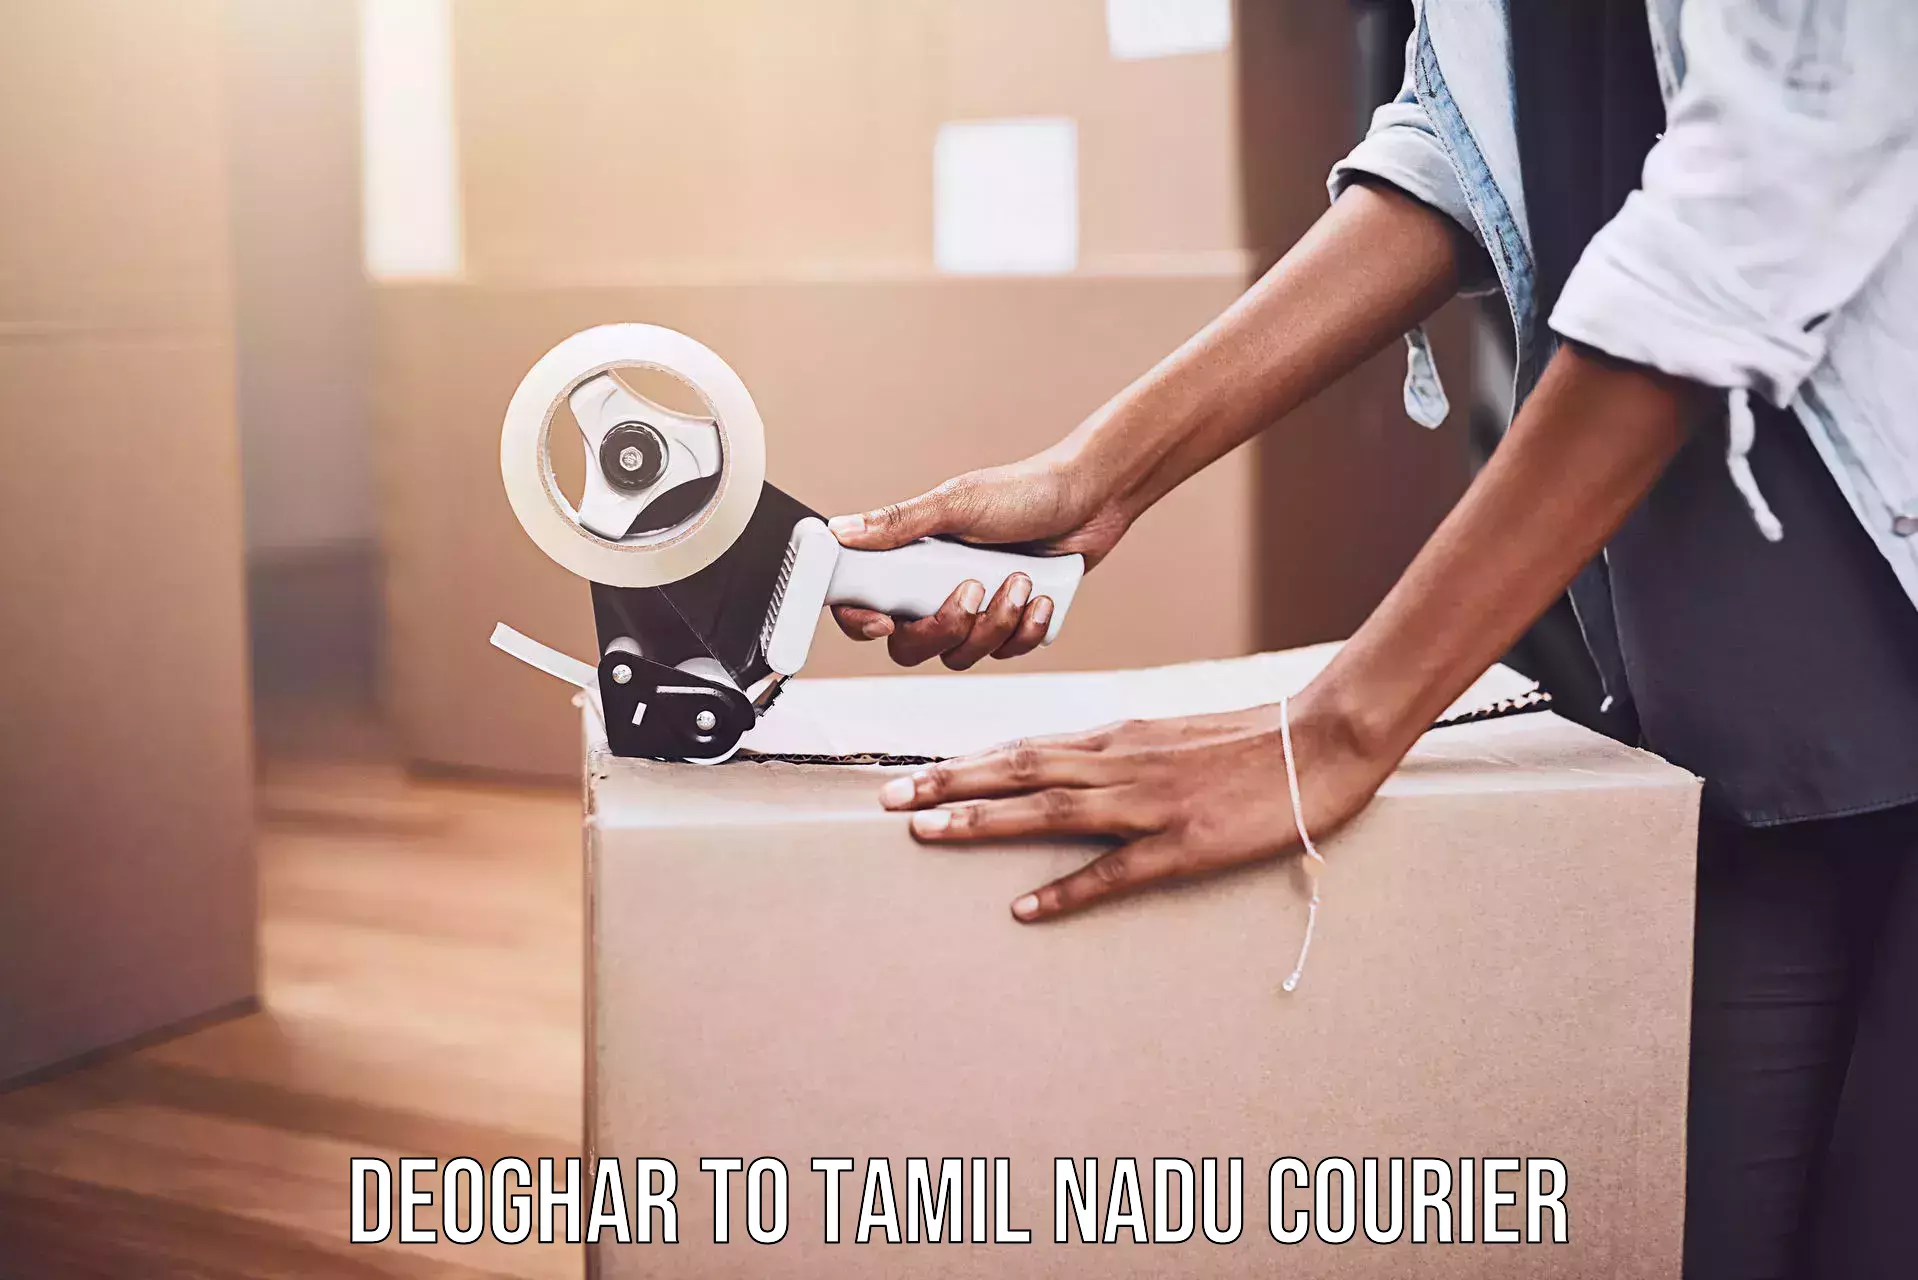 On-call courier service Deoghar to Perambalur